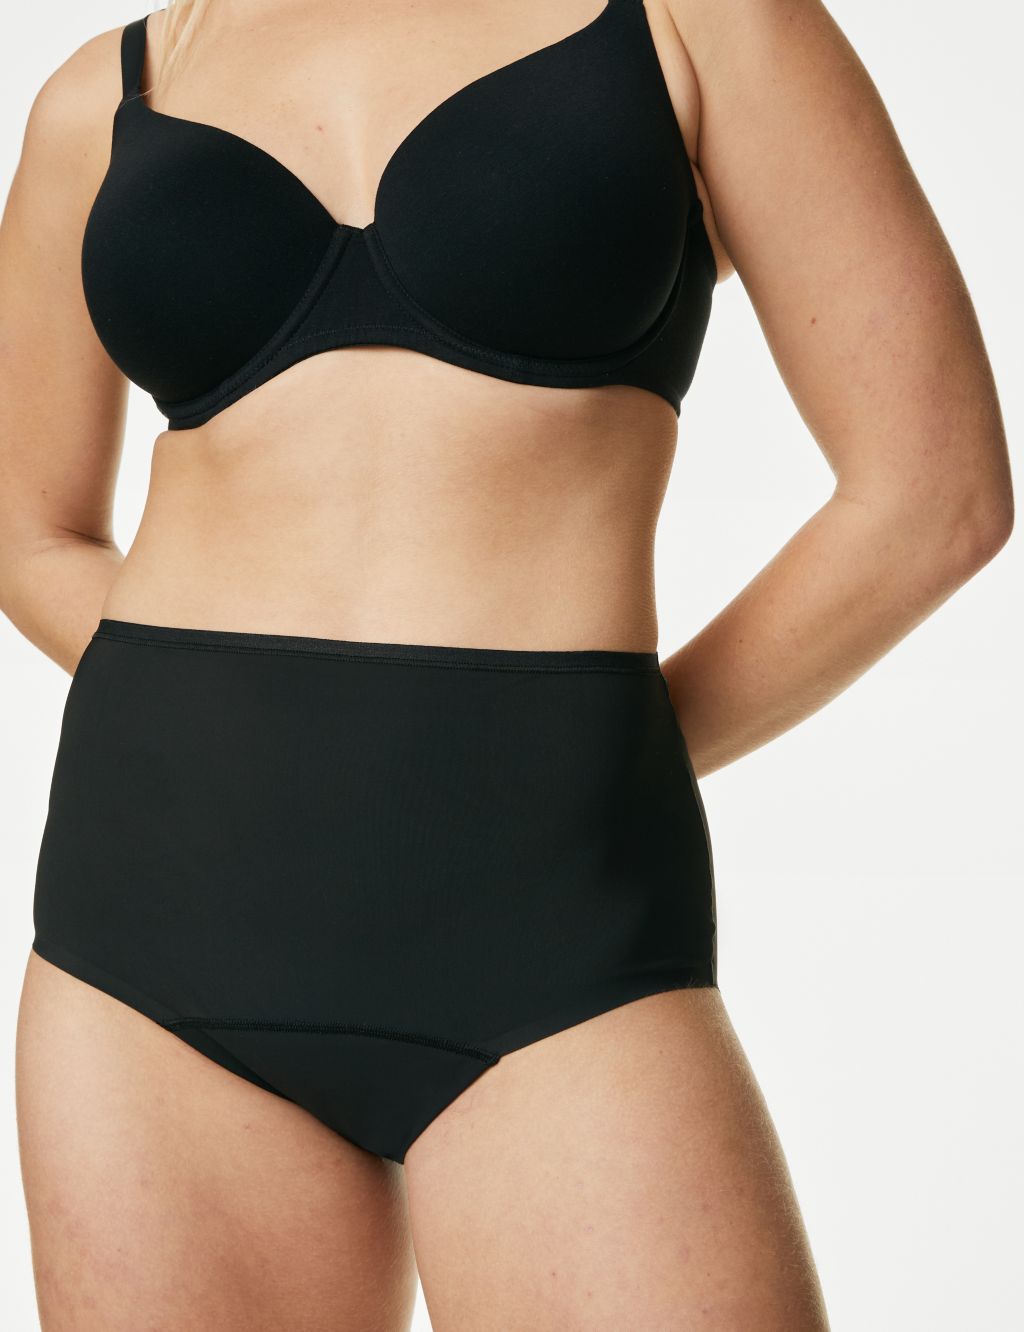 Shoppers heap praise on M&S for 'powerful' photograph of 'real' models in  new inclusive underwear range